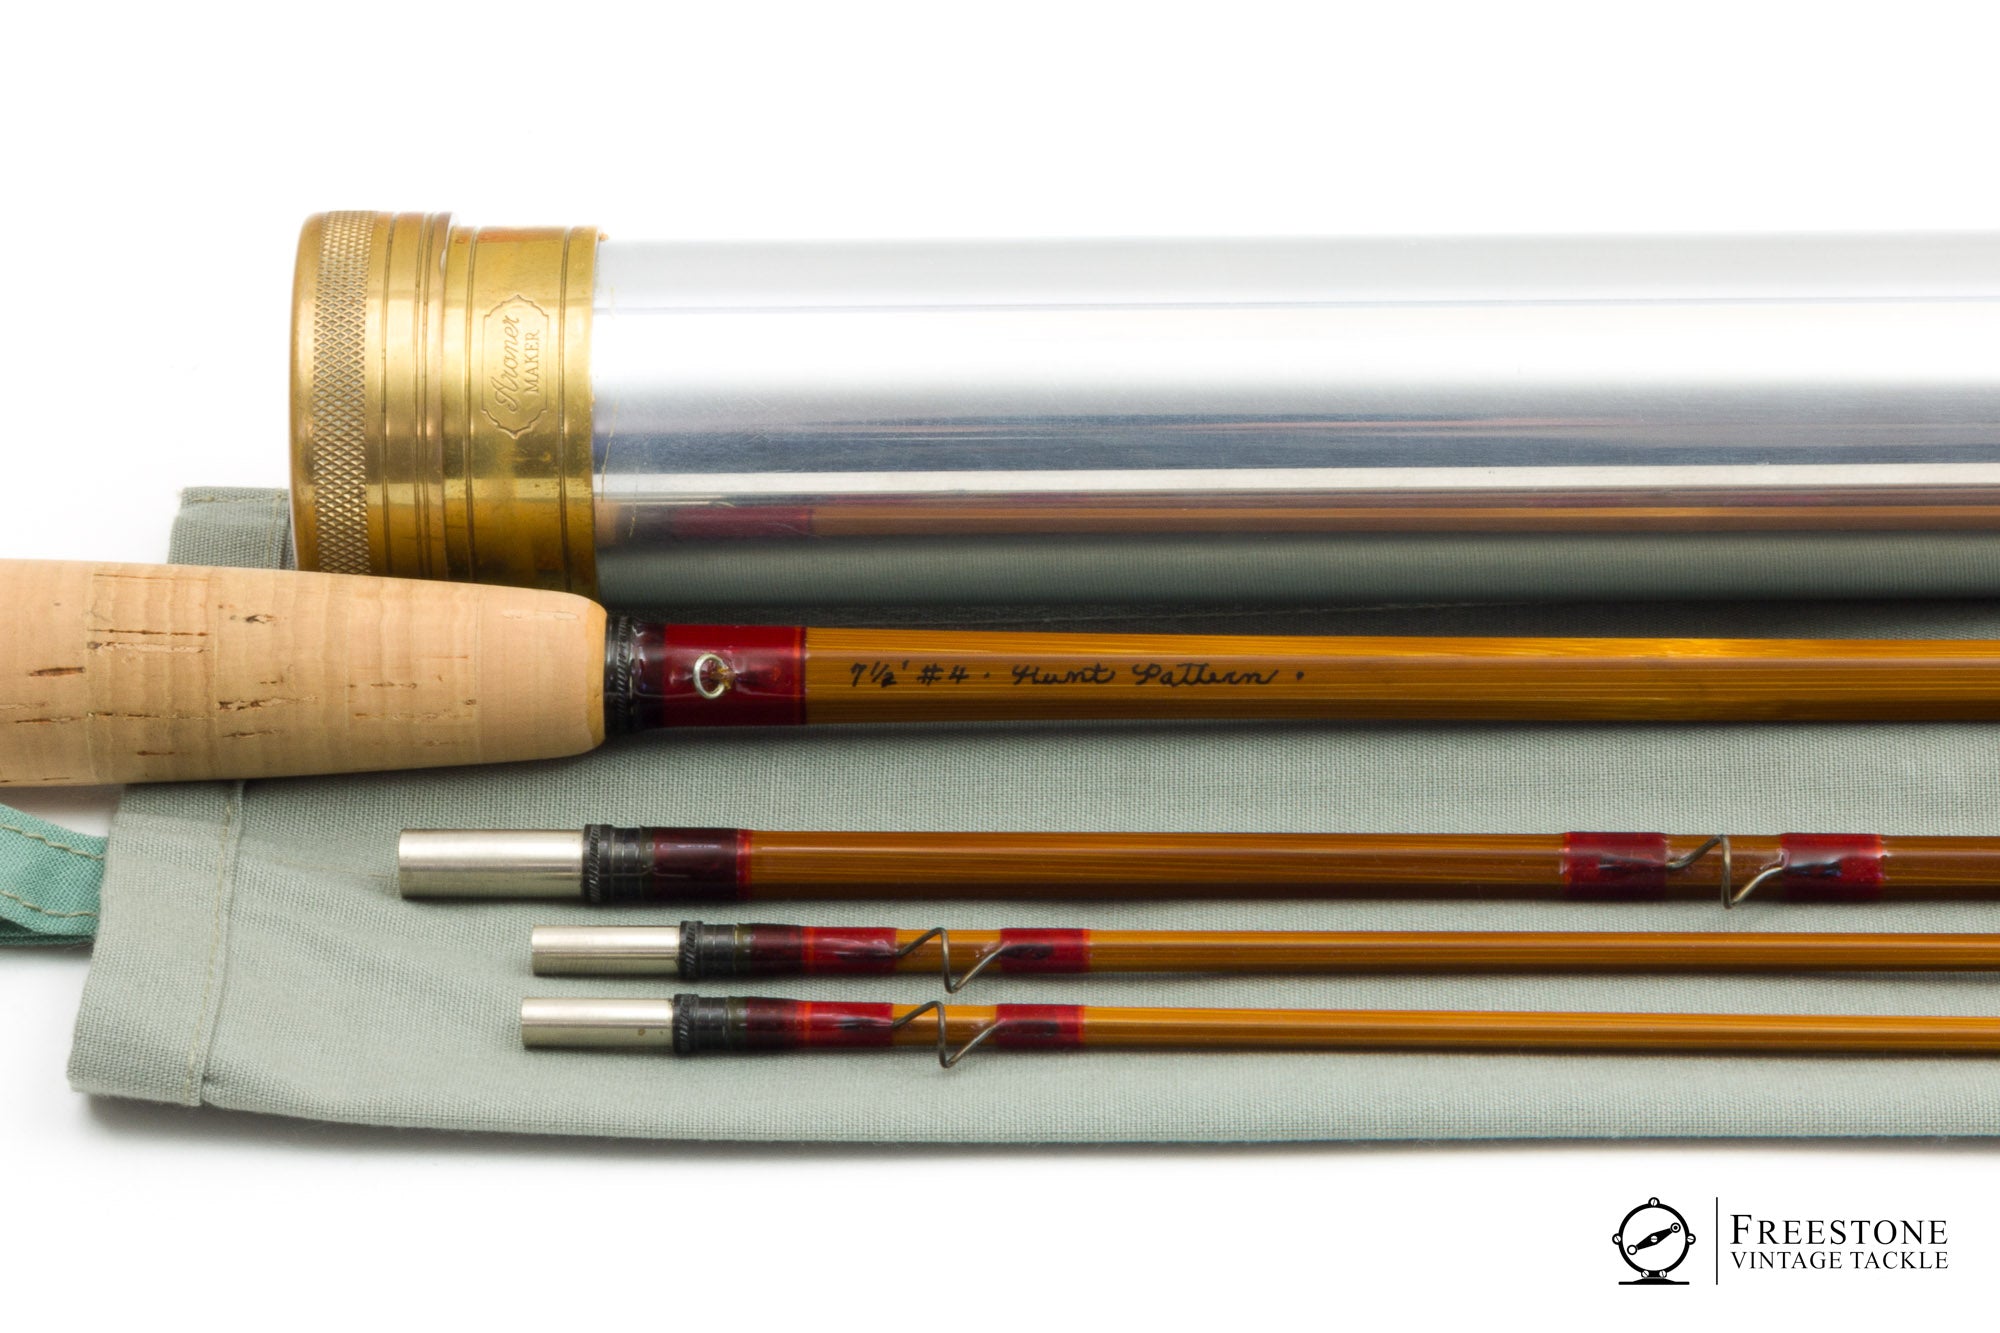 Fly Rods - Freestone Vintage Tackle